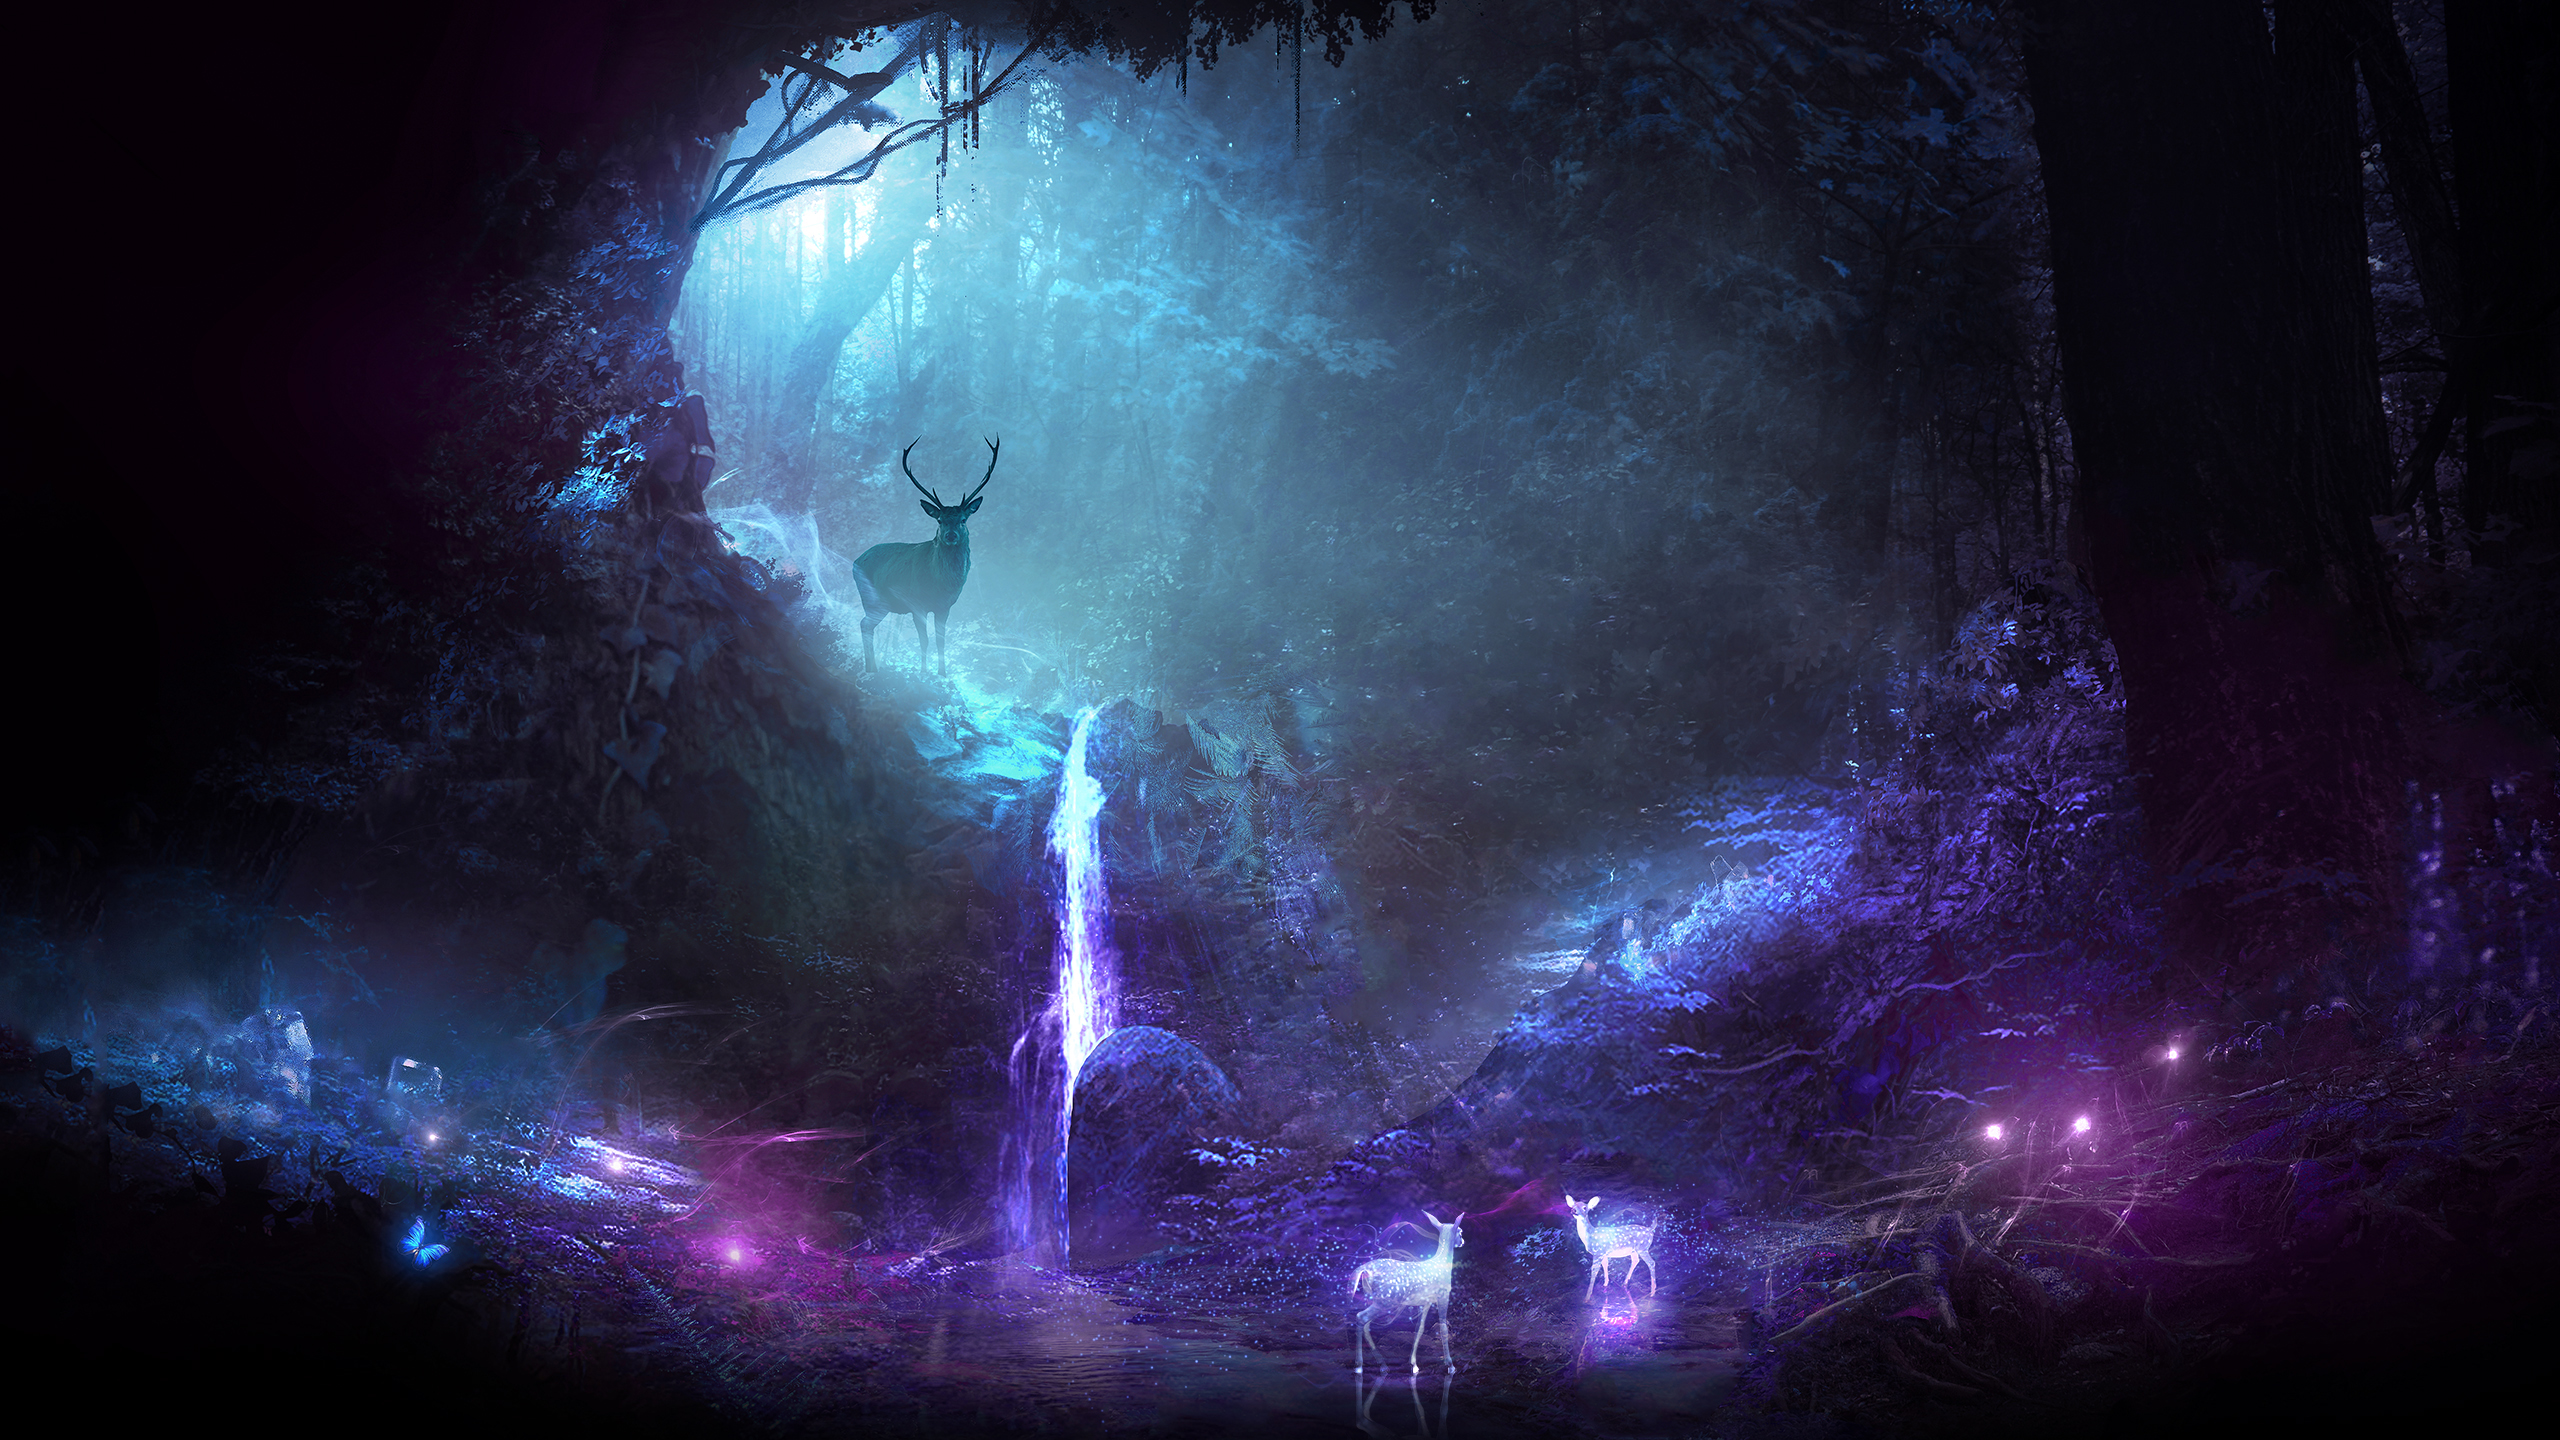 Deer animal night fantasy waterfall hd artist k wallpapers images backgrounds photos and pictures